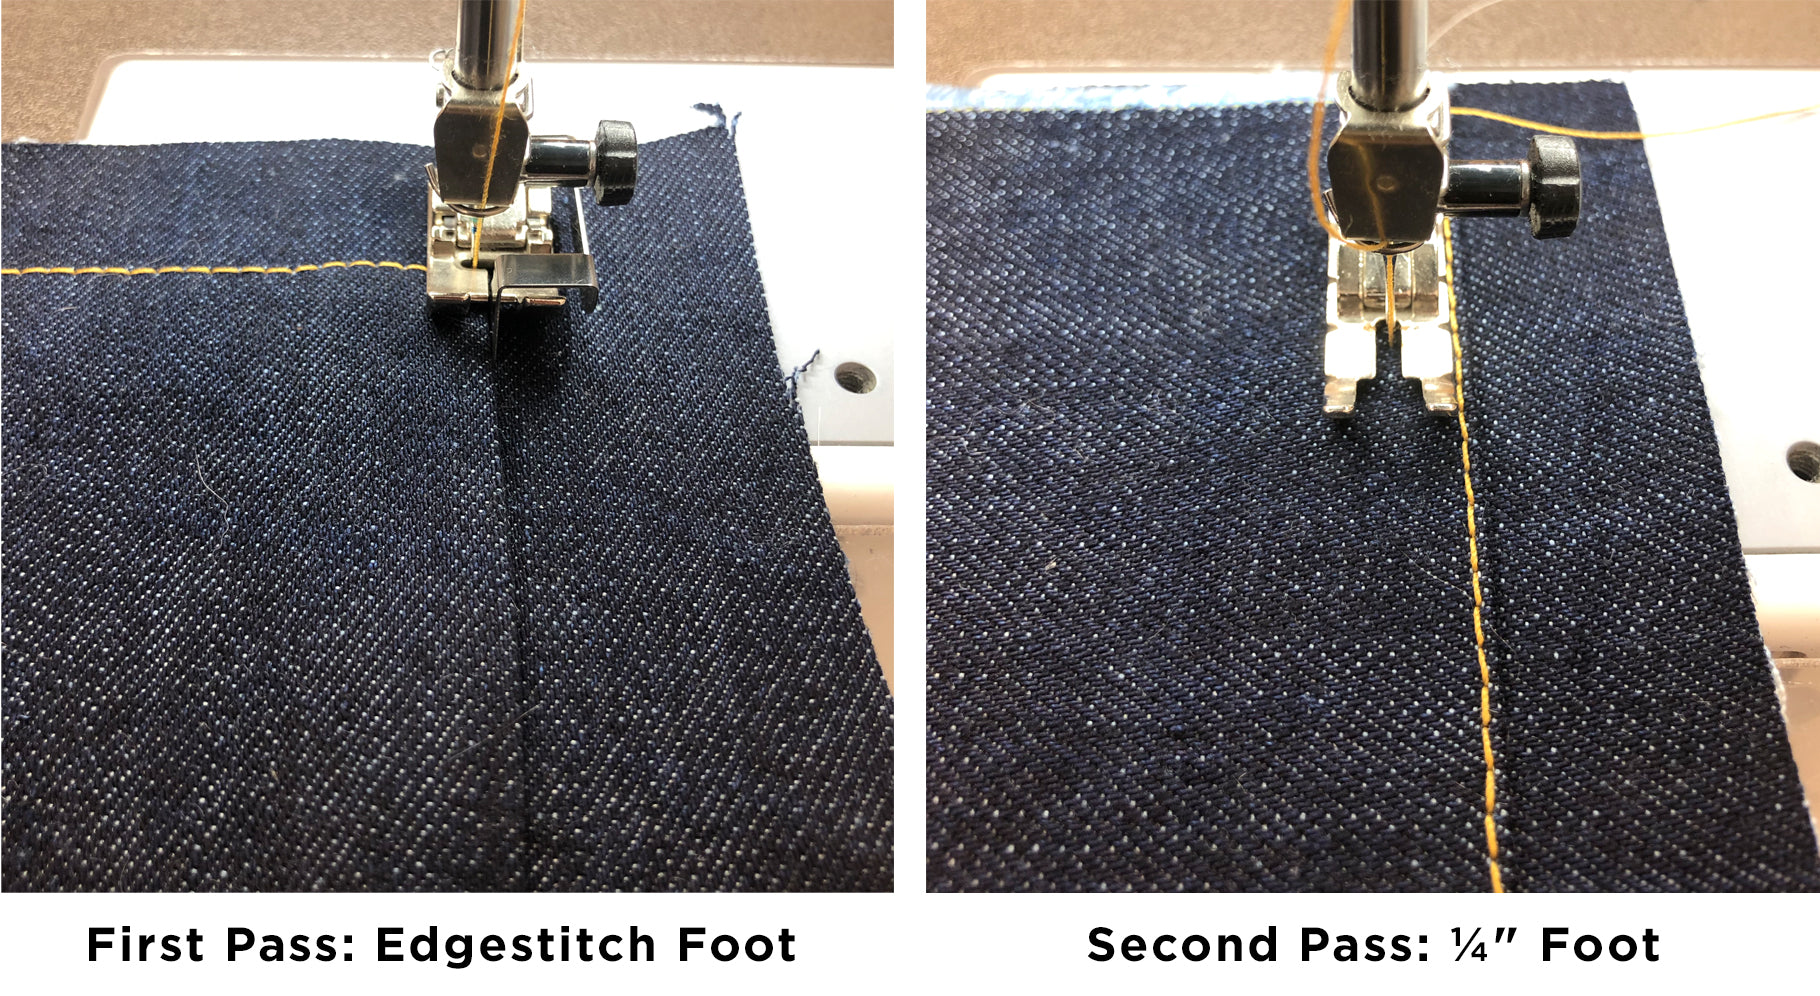 Our Top Tips for Professional Topstitching: Aligning your Stitching | Grainline Studio